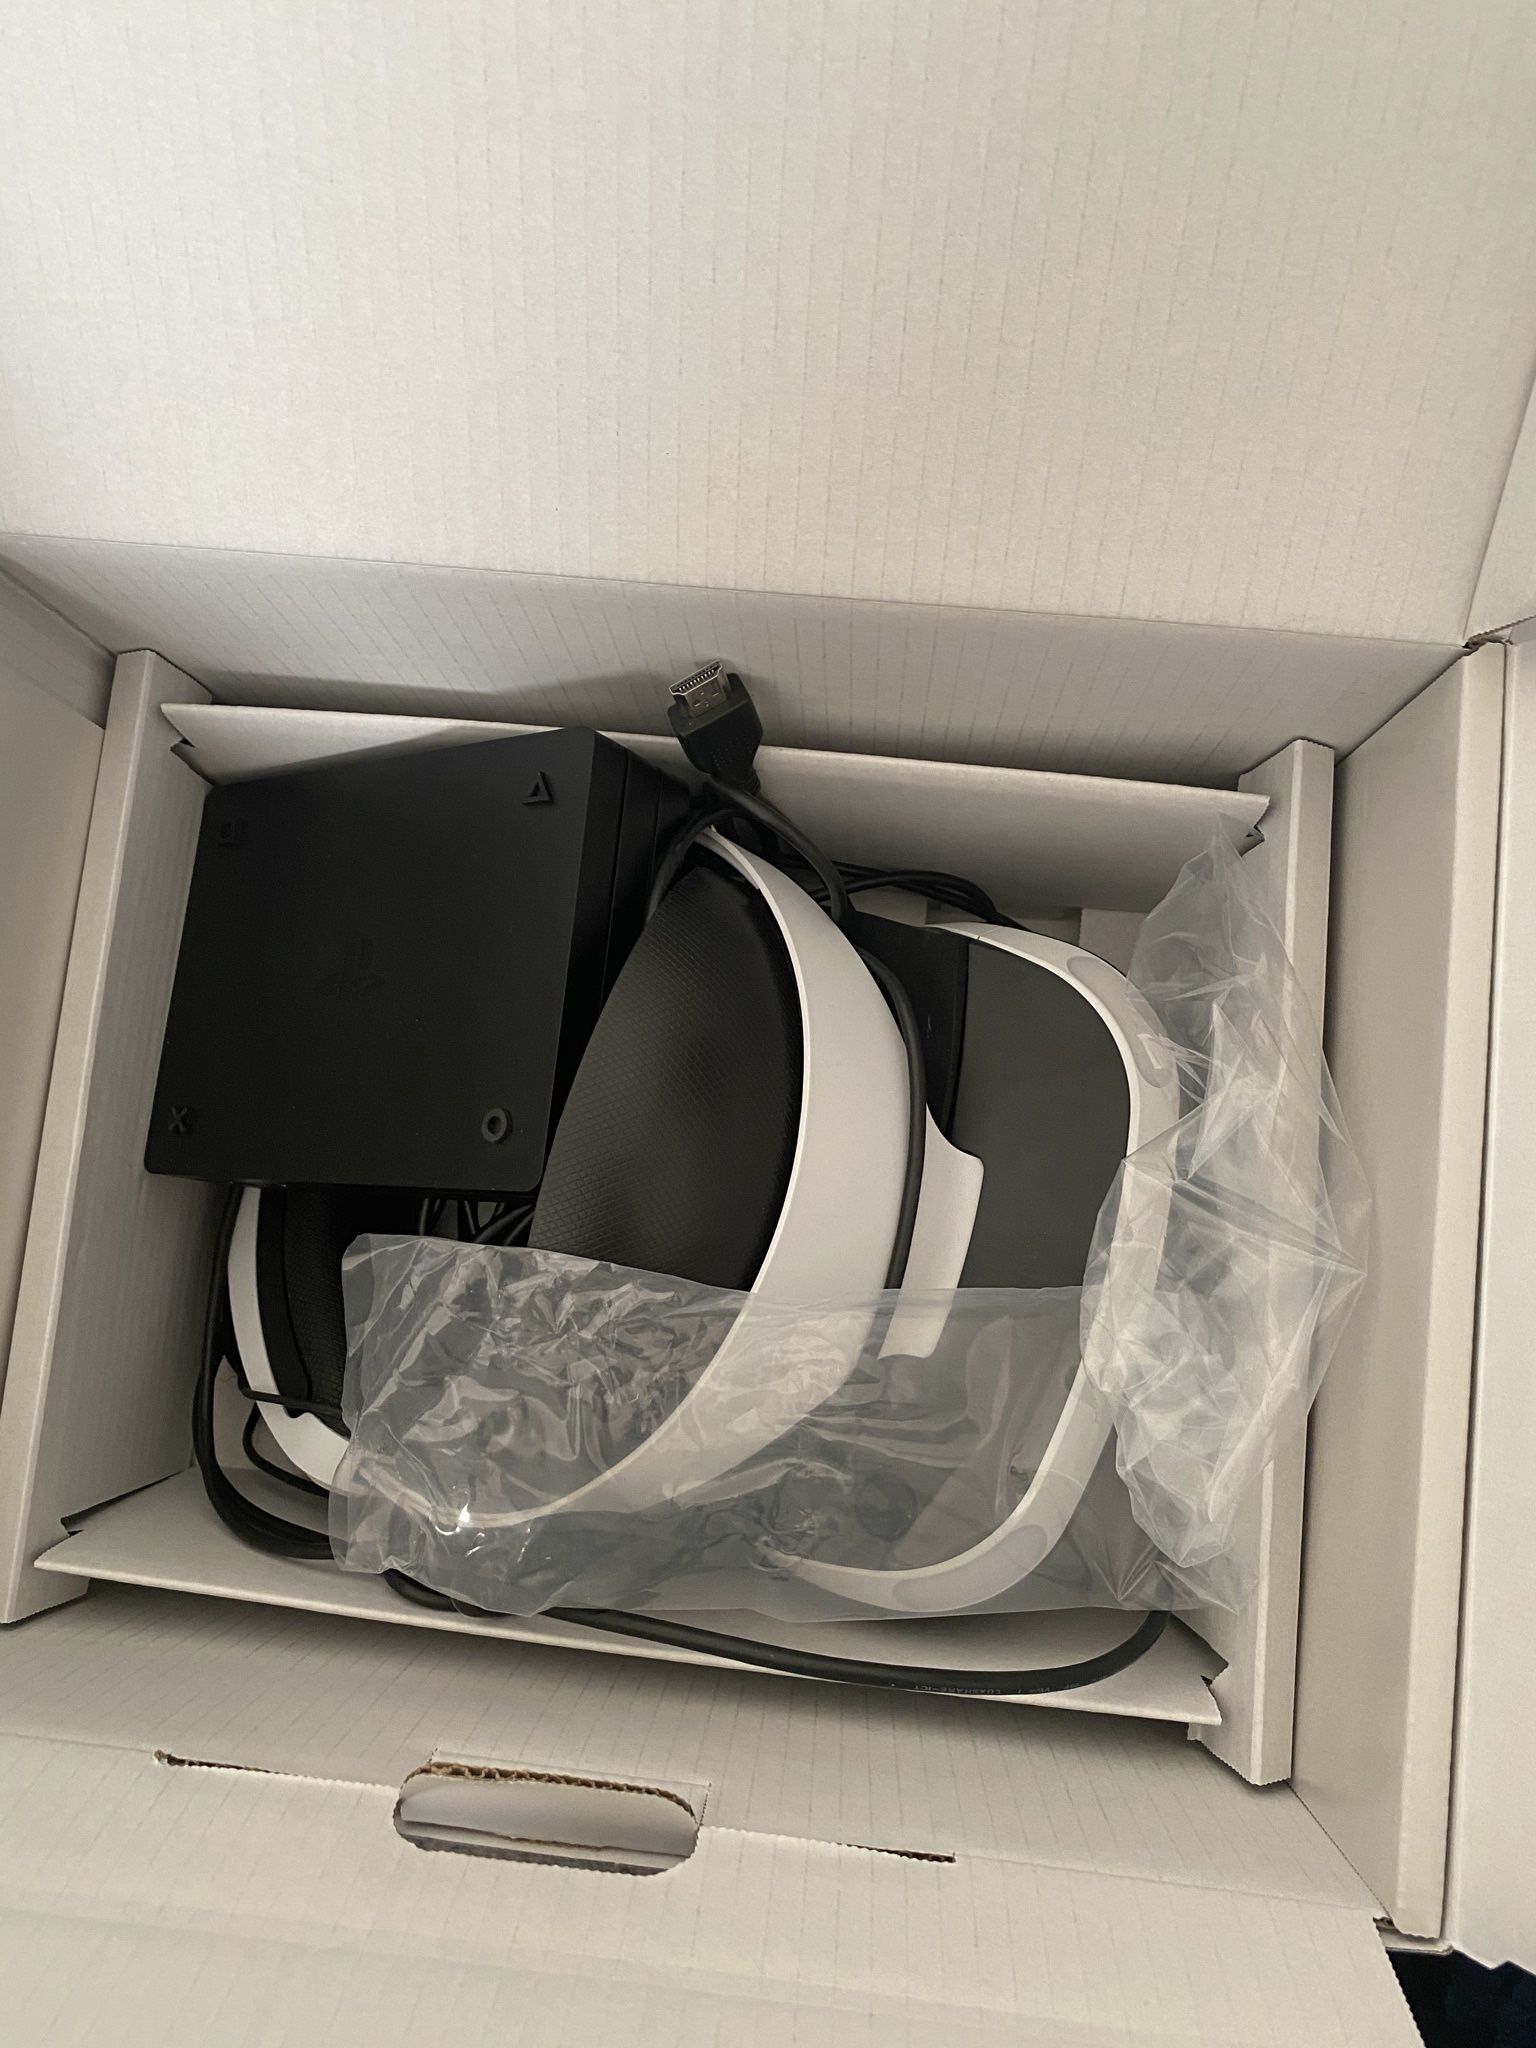 PlayStation 4 With VR